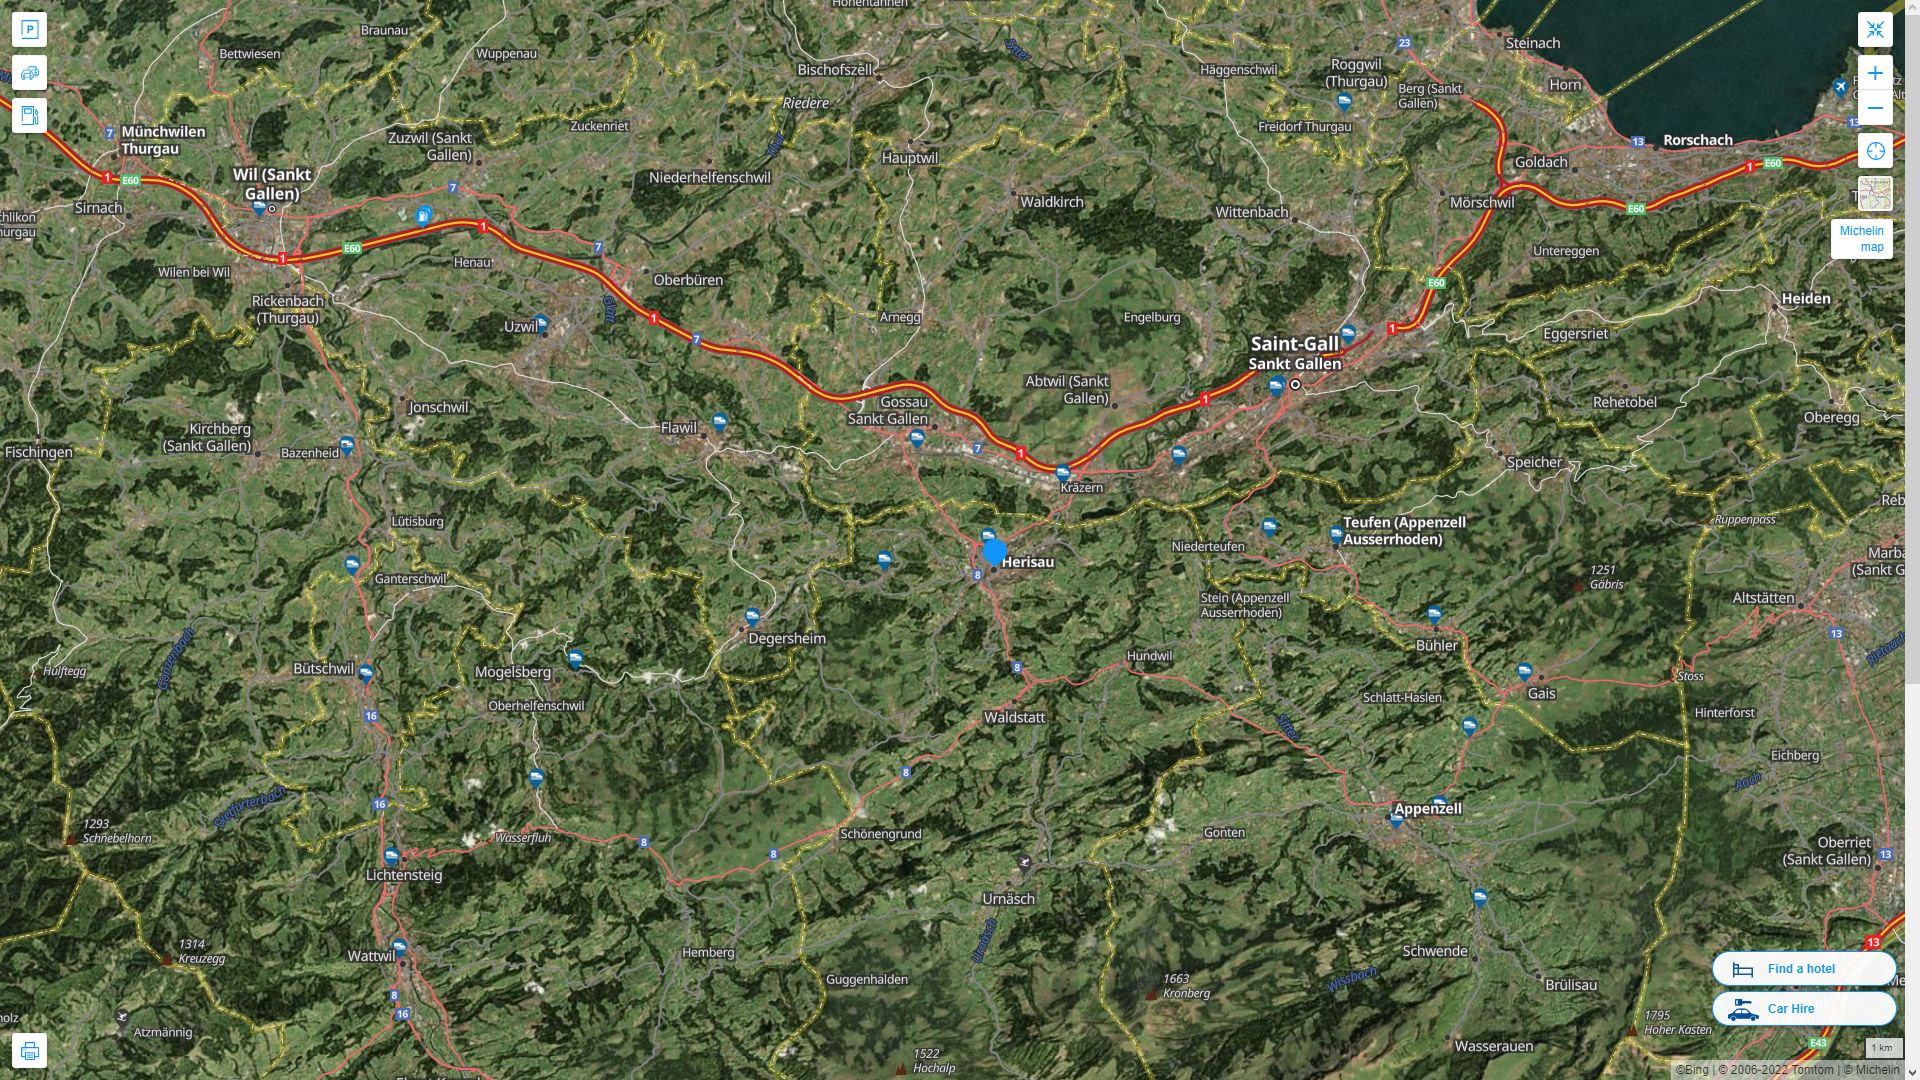 Herisau Highway and Road Map with Satellite View